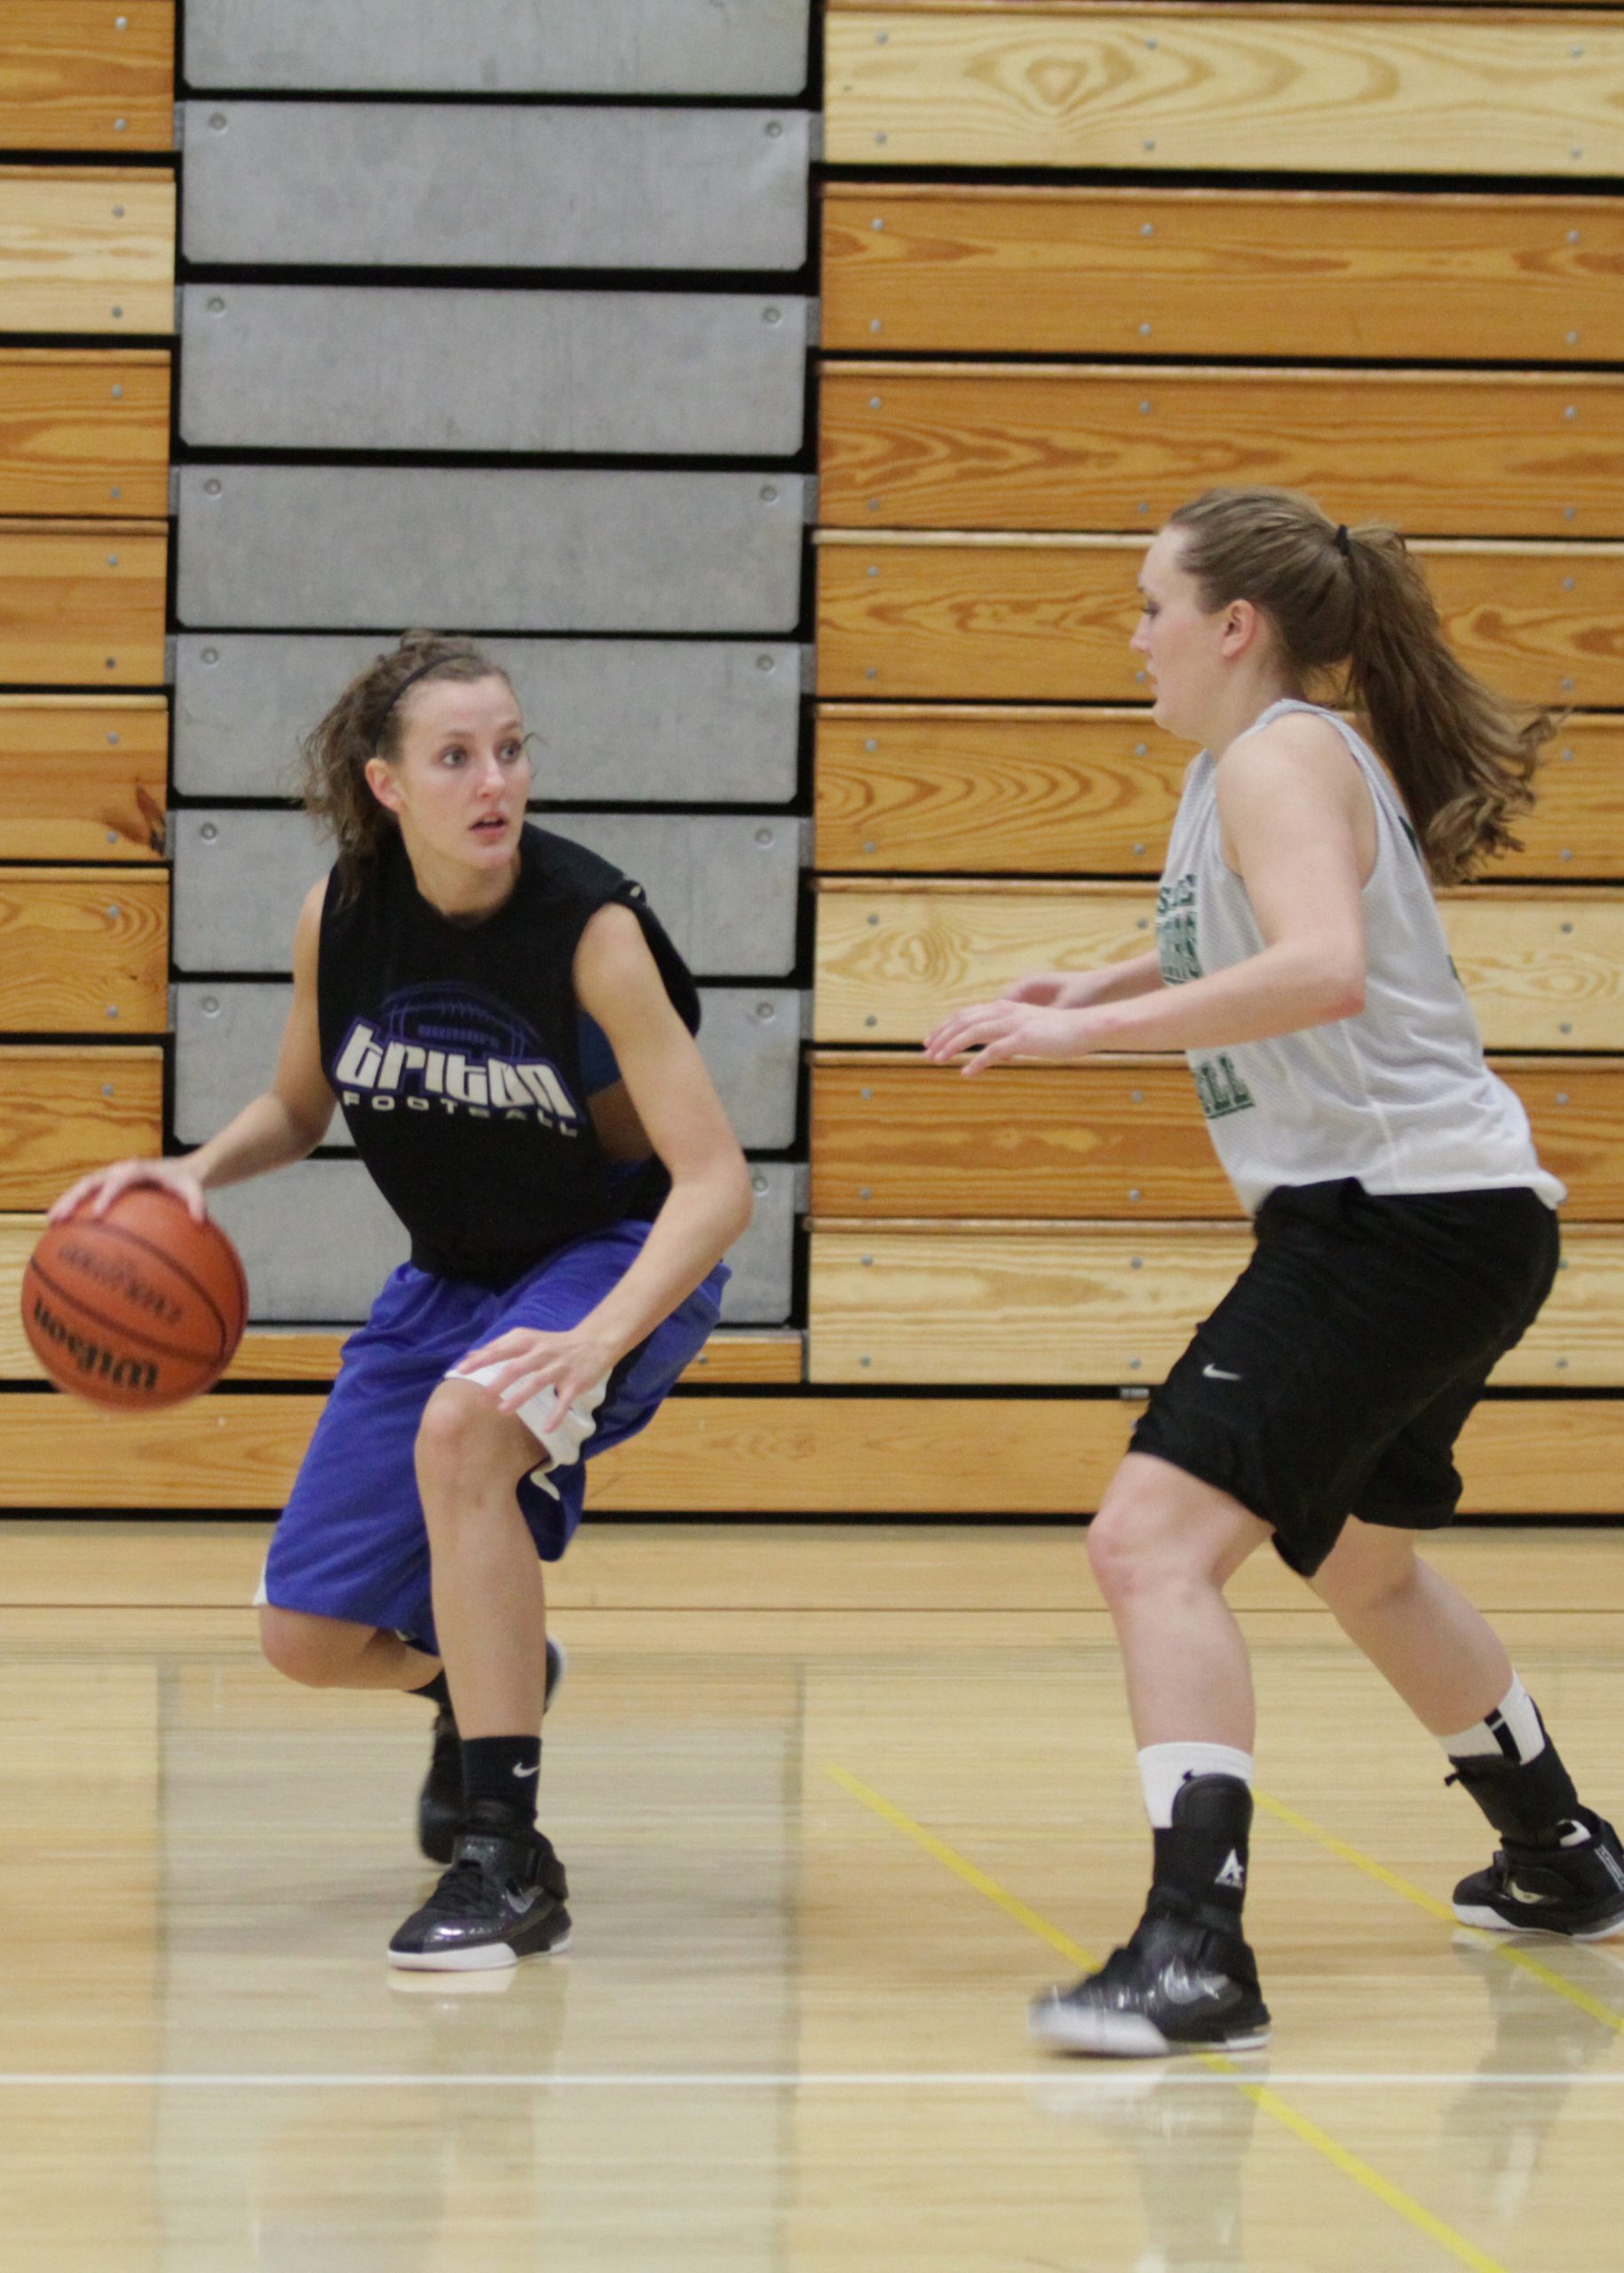 A player on the Goshen women's basketball team dribbles the ball away from an opposing player